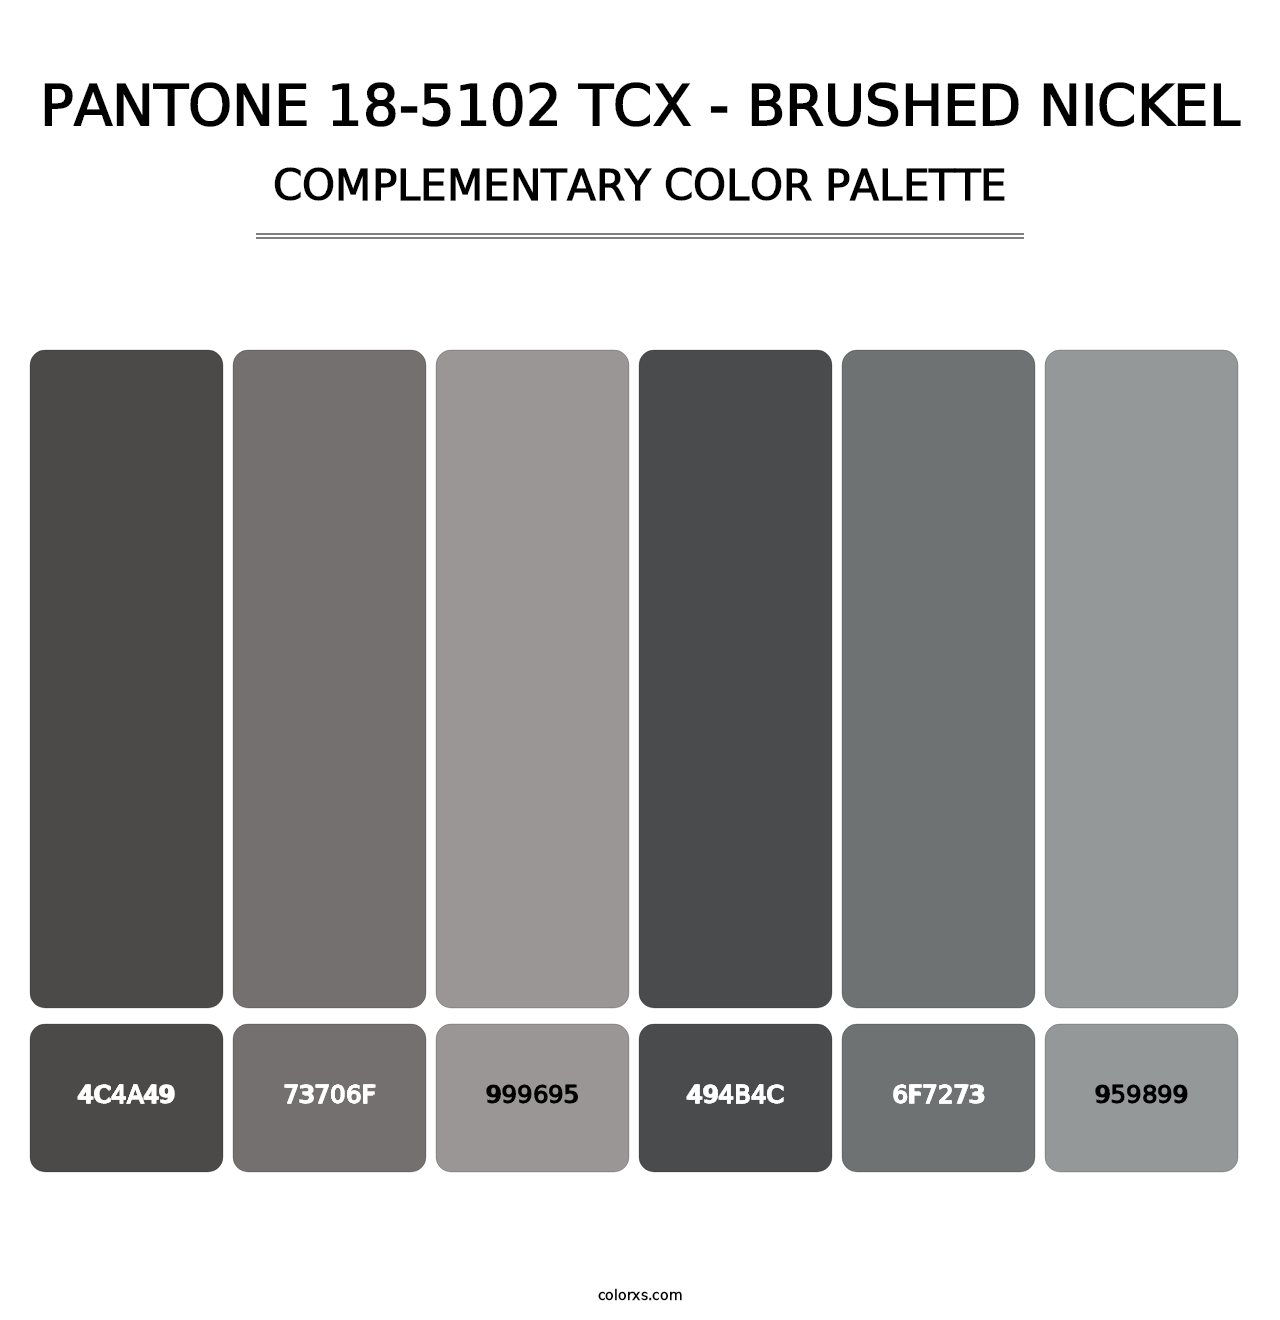 PANTONE 18-5102 TCX - Brushed Nickel - Complementary Color Palette